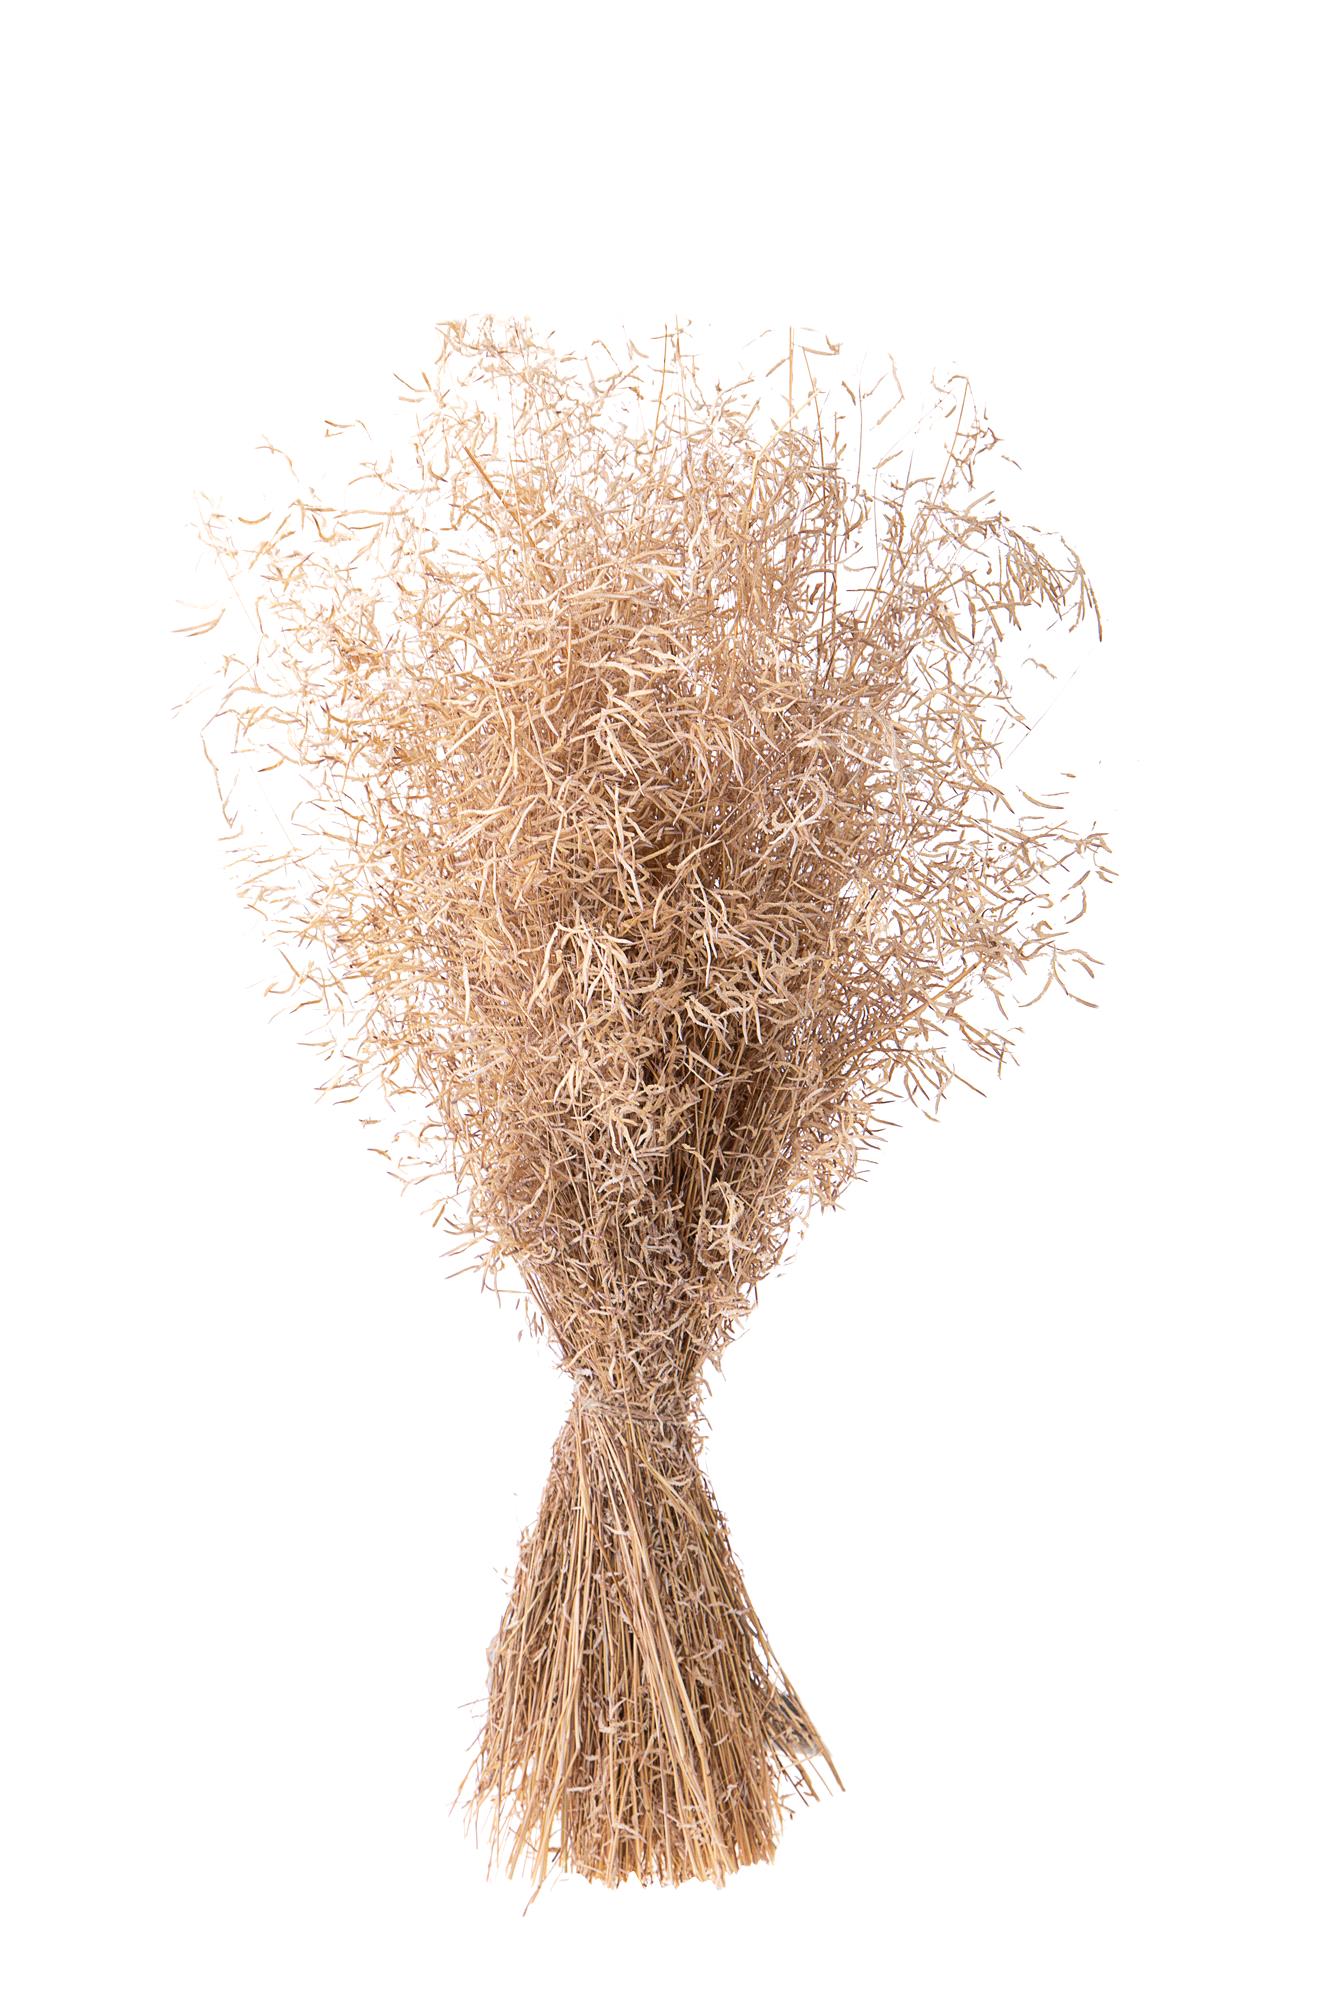 NATURAL PRODUCTS DRIED FLOWERS AND ERBS,MUNNY GRASS NATURALE A MAZZO